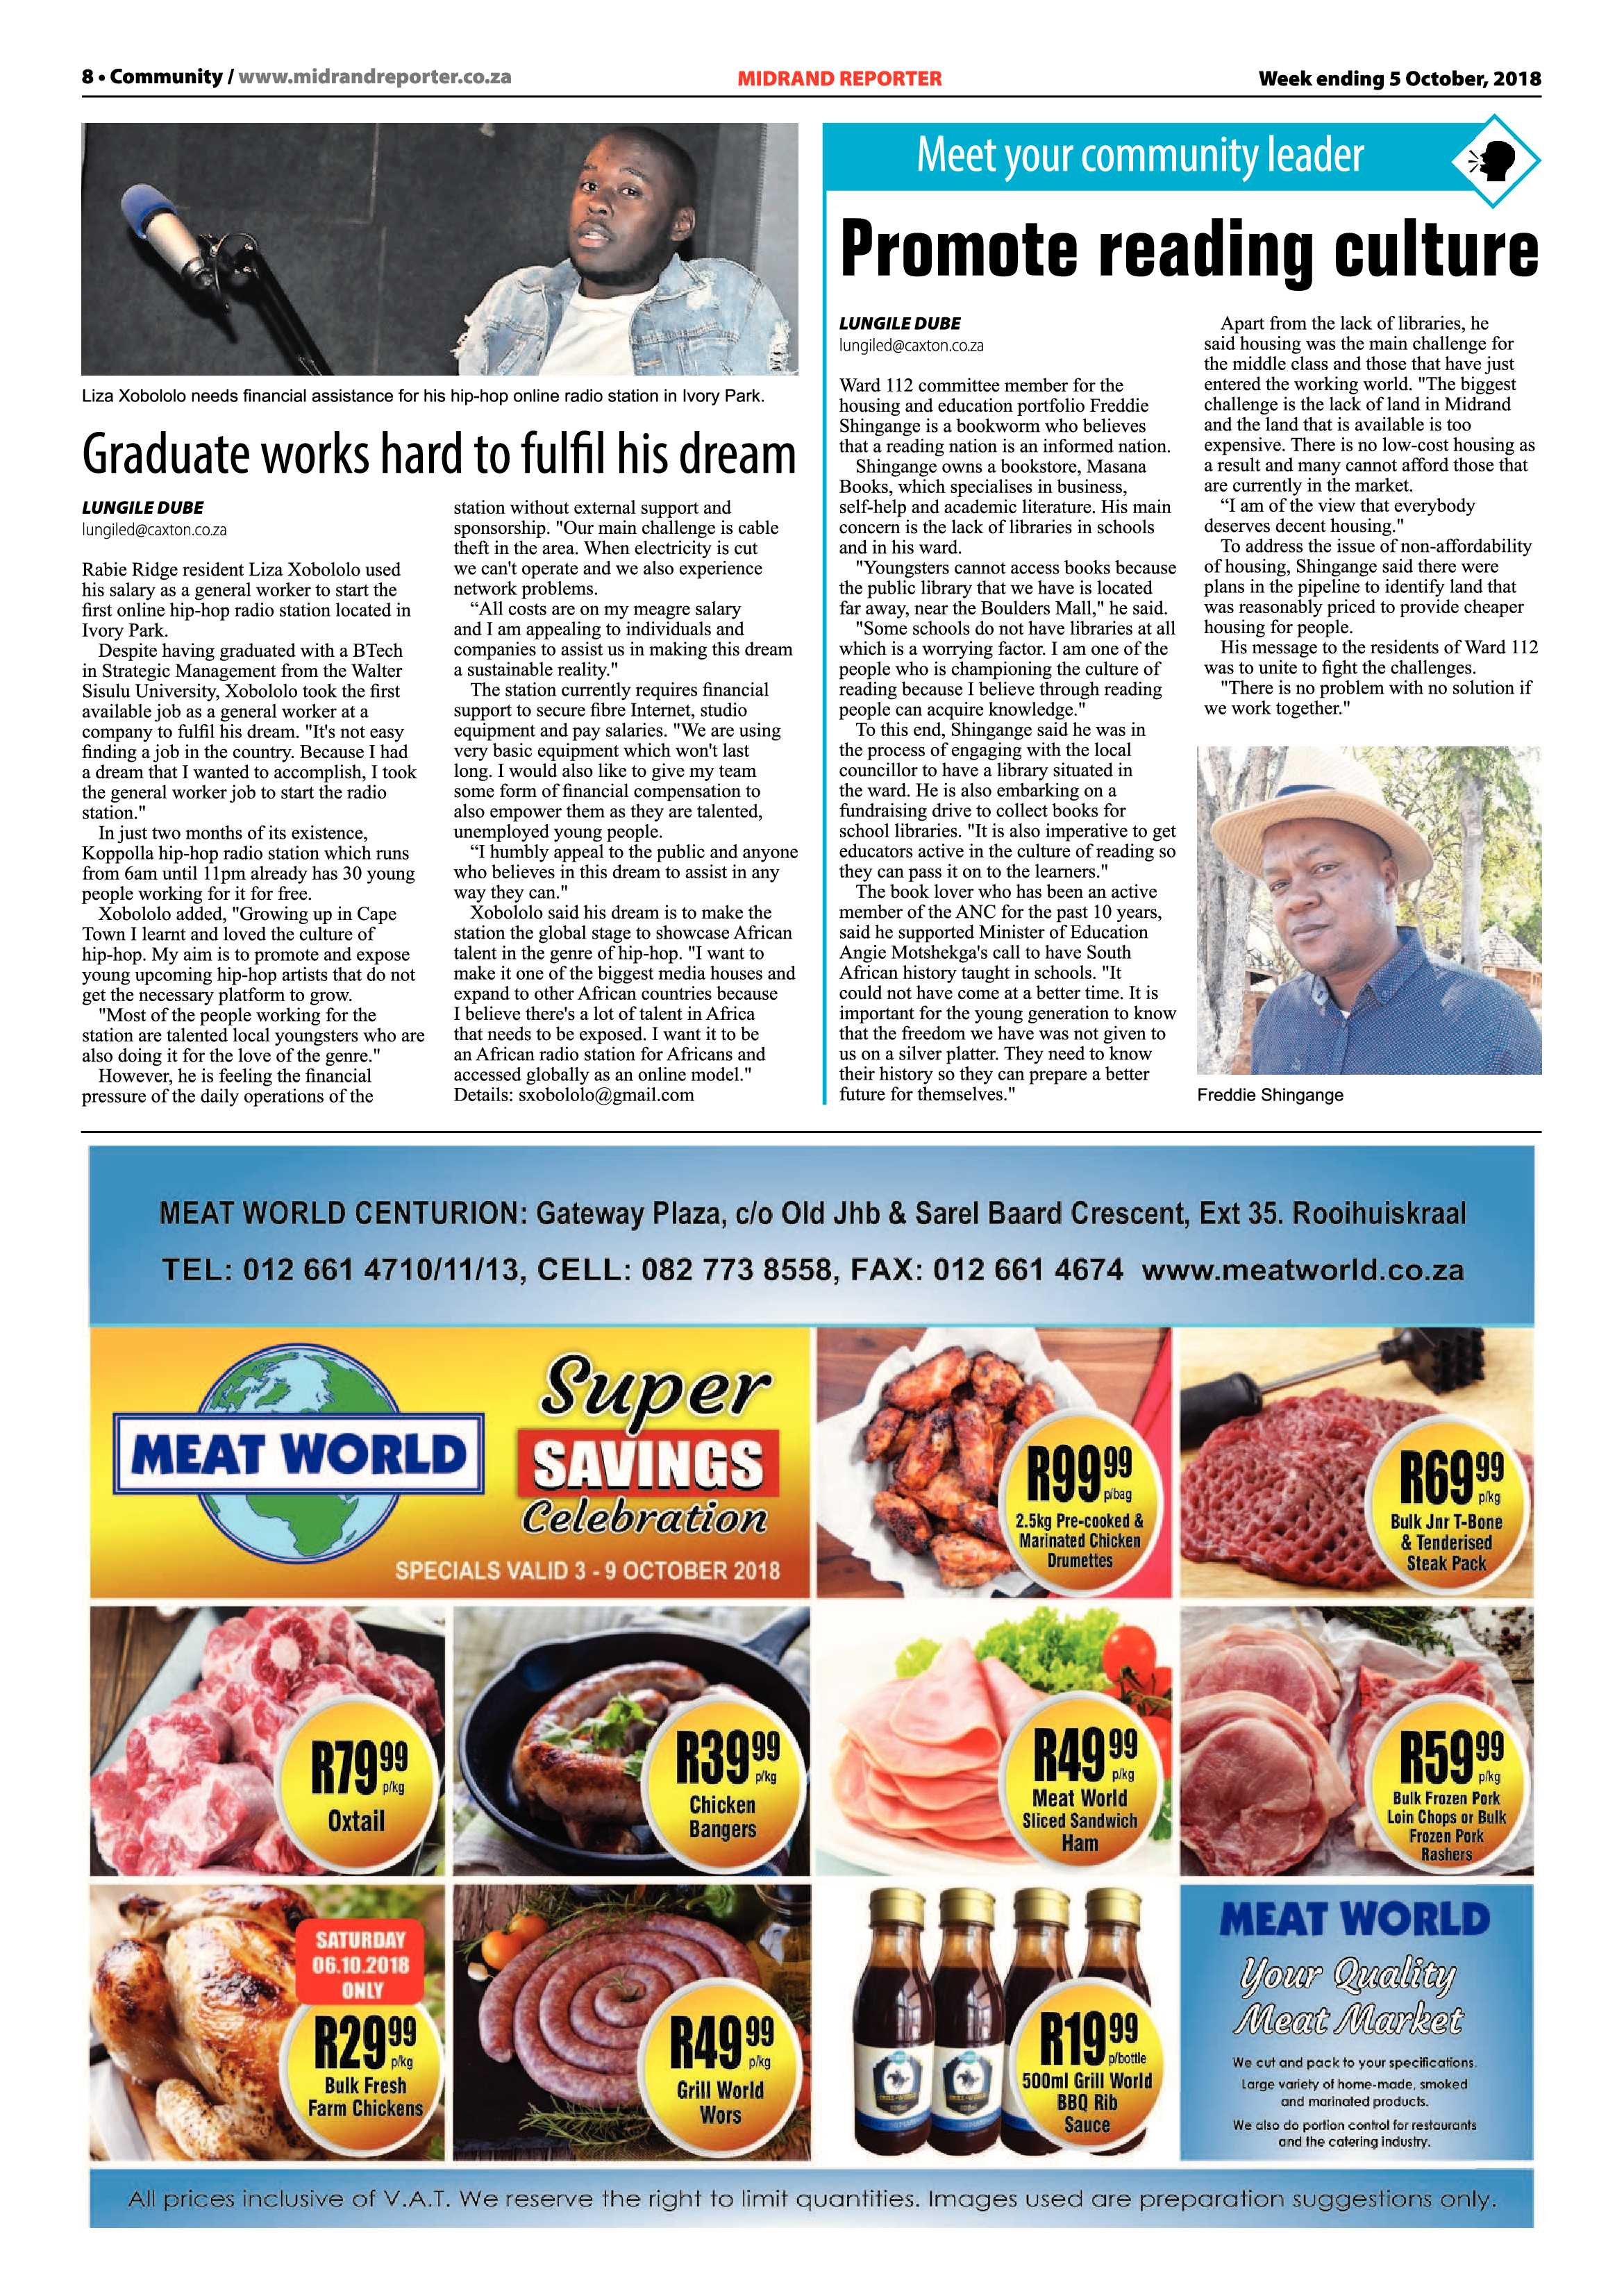 Midrand Reporter 5 October, 2018 page 8